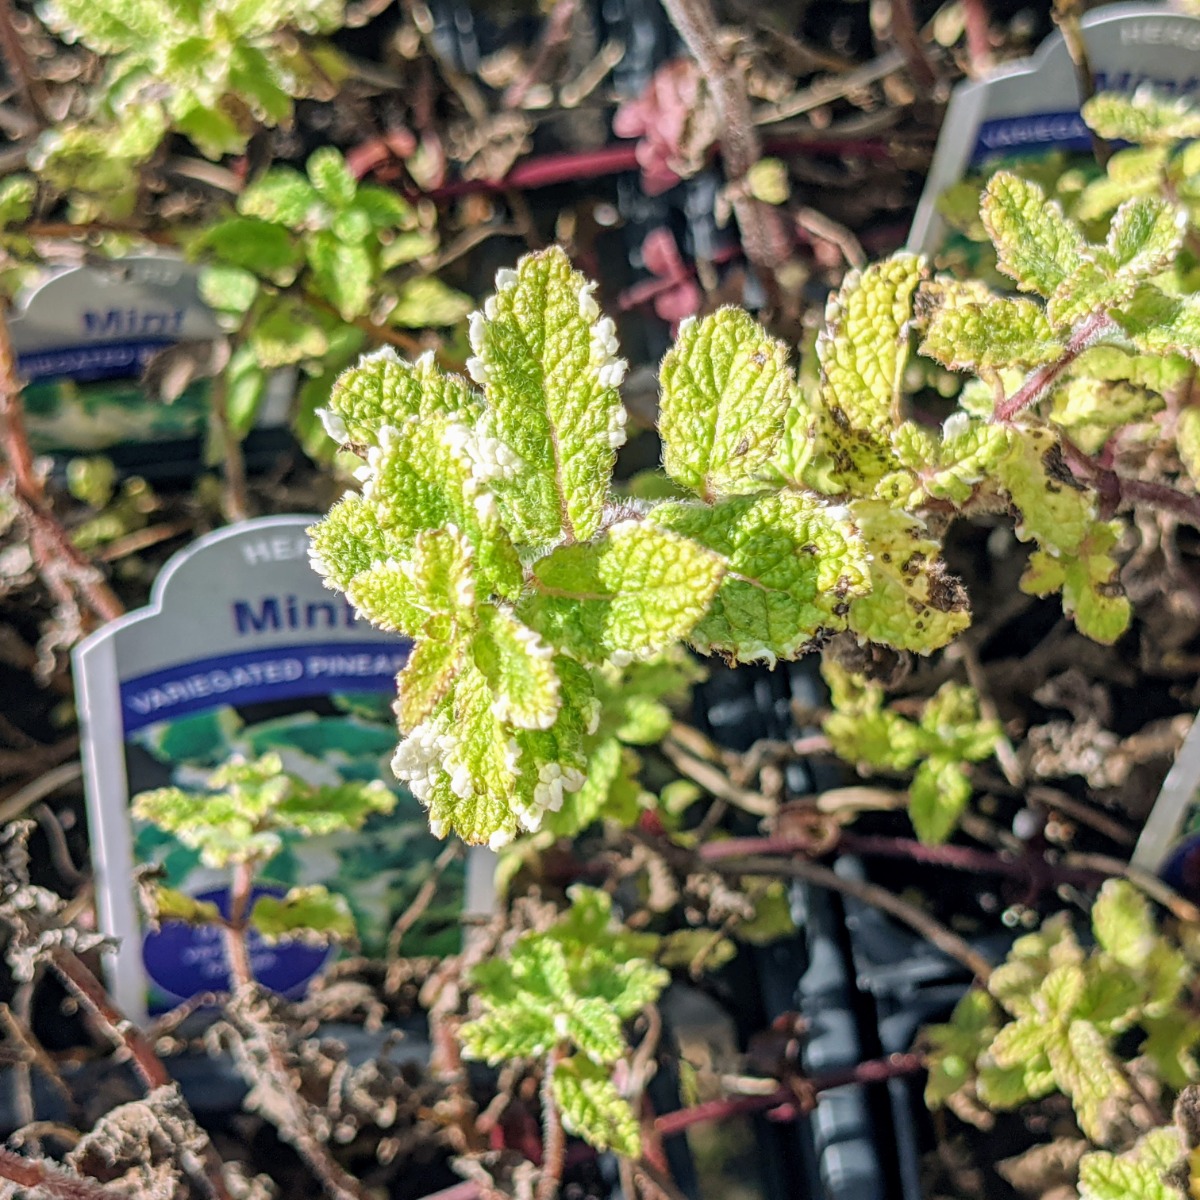 Mint plant for sale at a farm stand in 2021